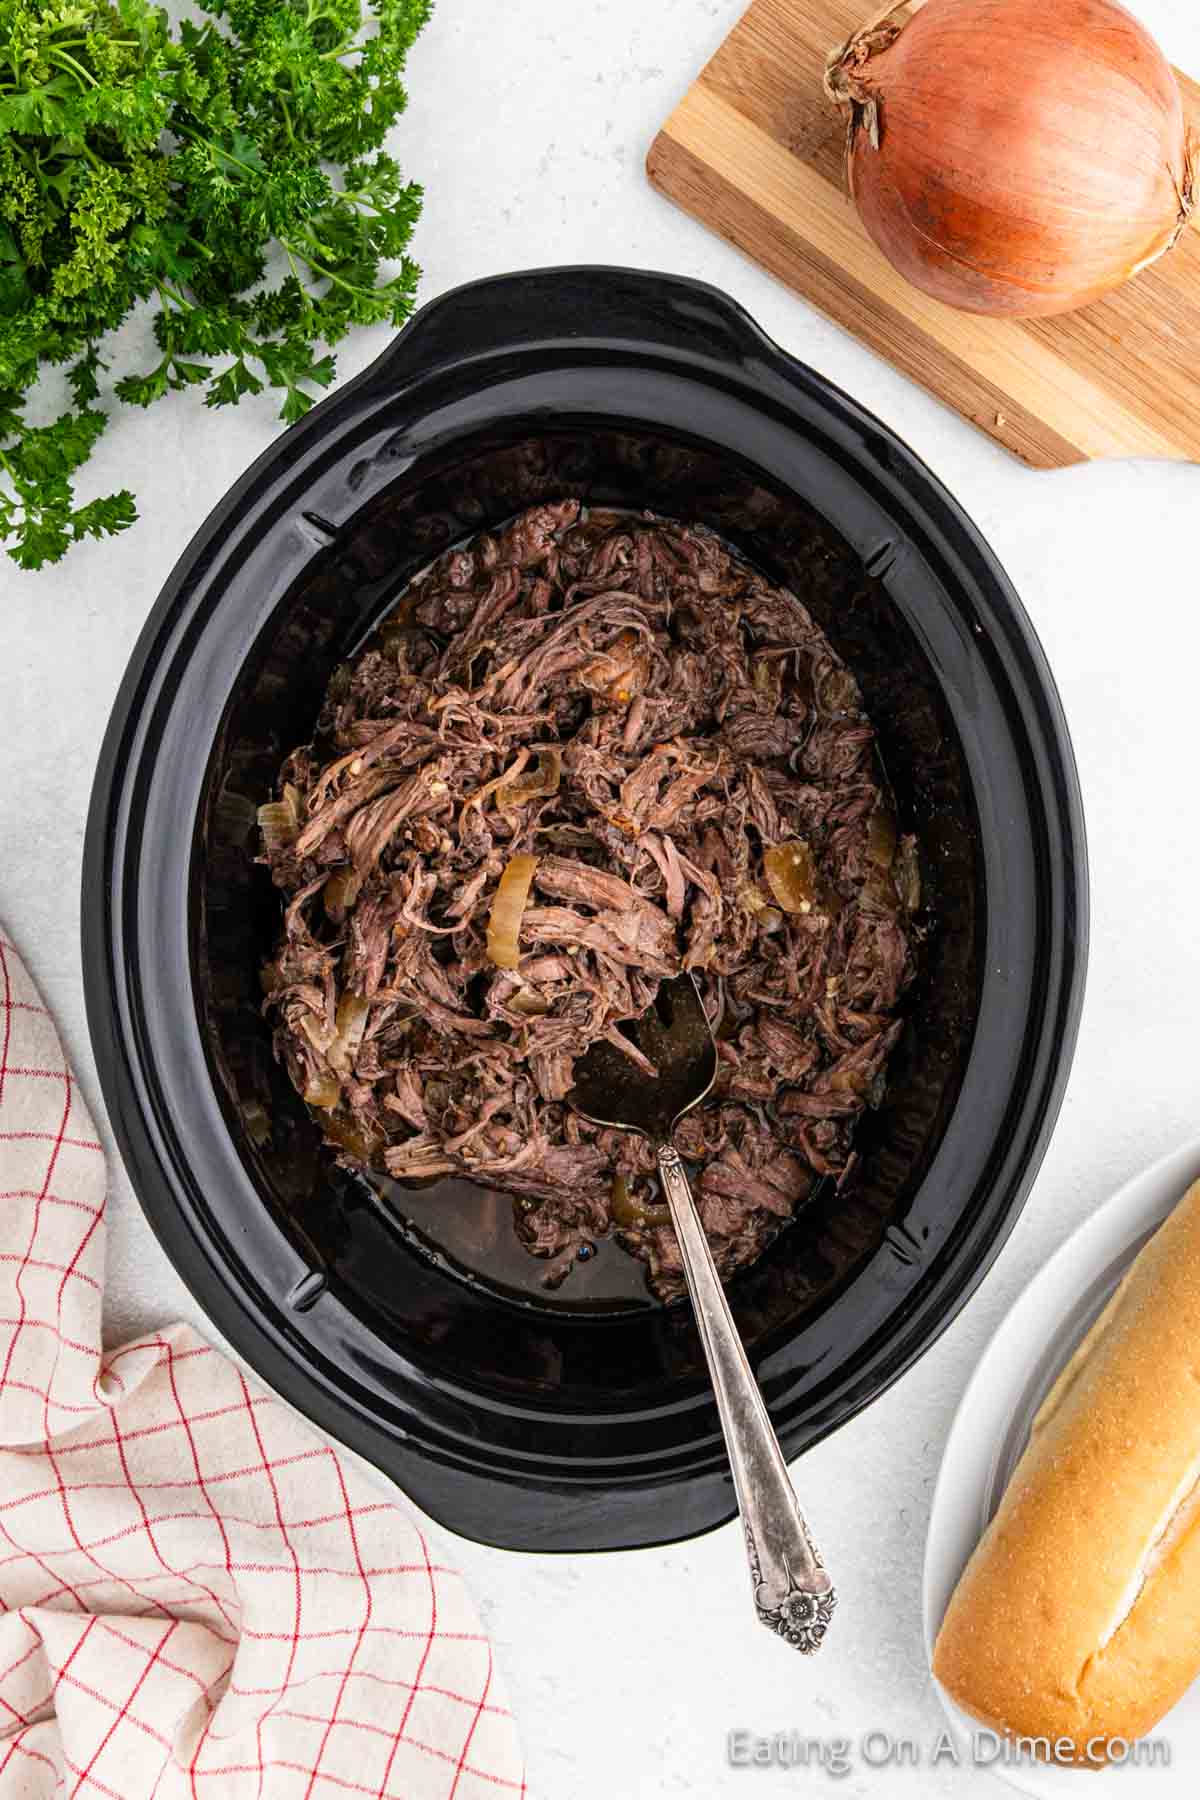 Shredded beef in the slow cooker with a spoon